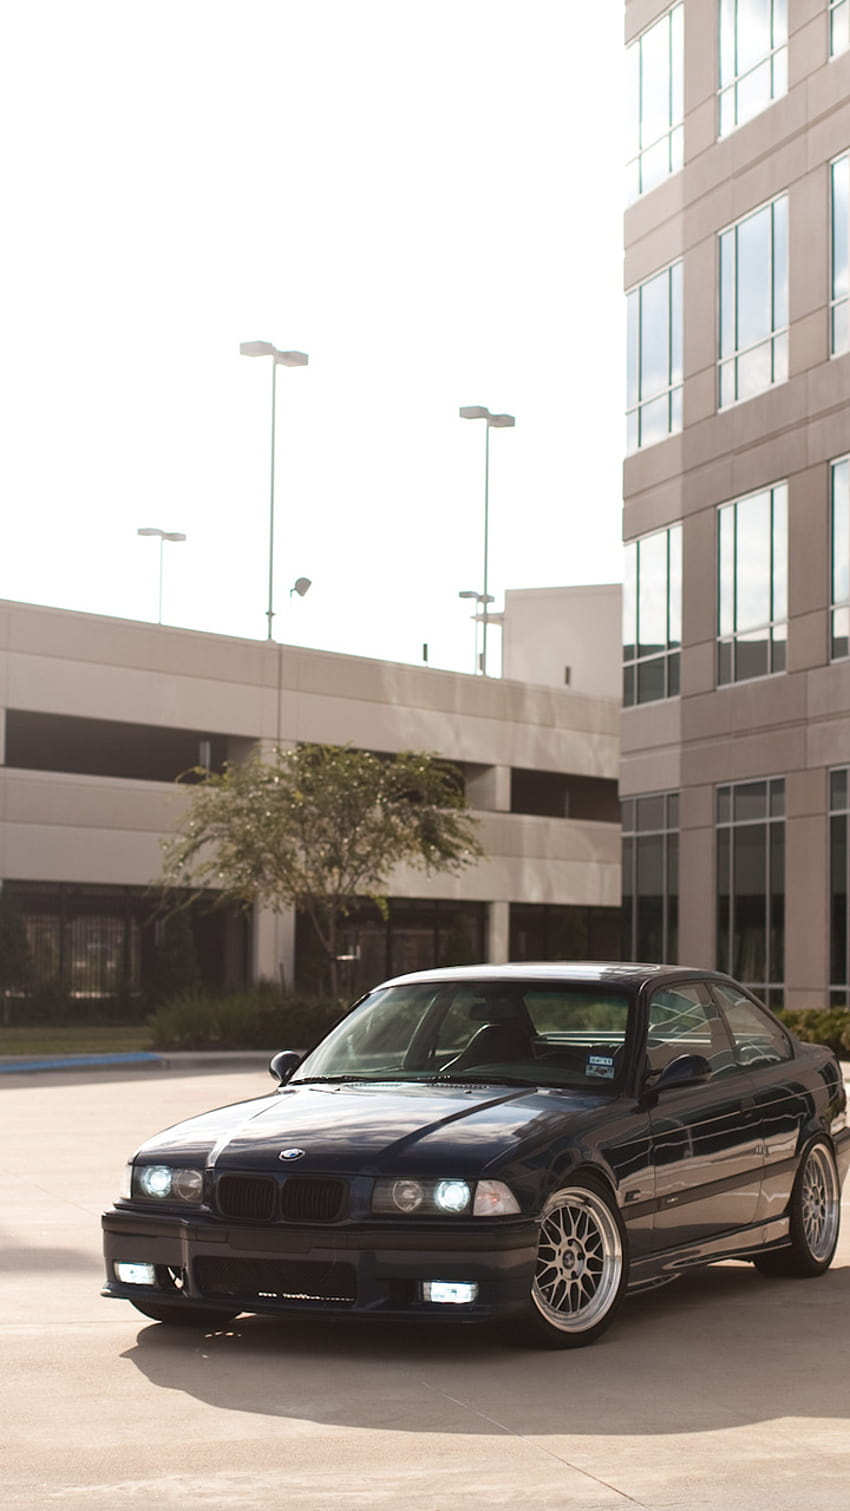 Bmw E36 Iphone Hd Wallpapers | Pxfuel